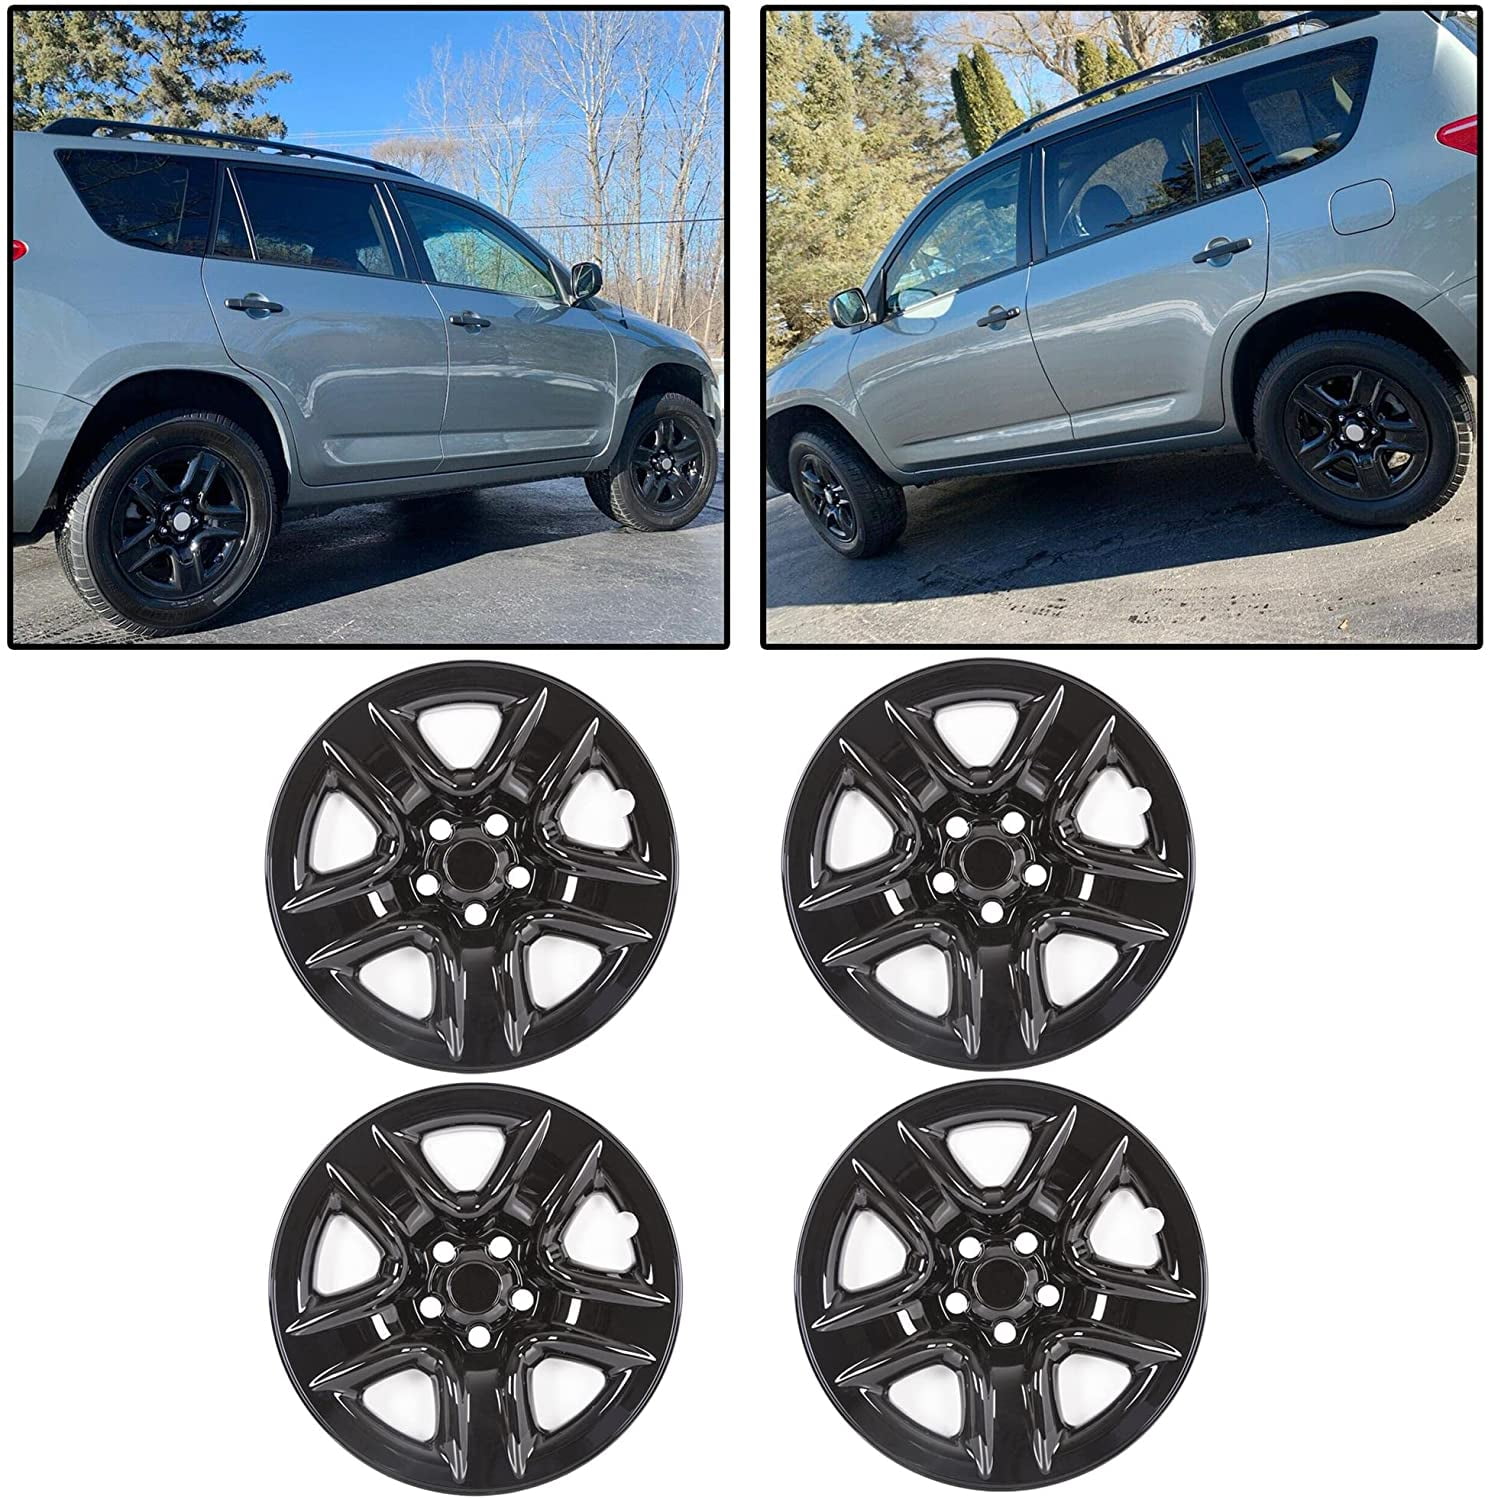 Premium Replacement 17-inch Wheel Cover Fits Toyota Rav4 2013-2015 Hubcap